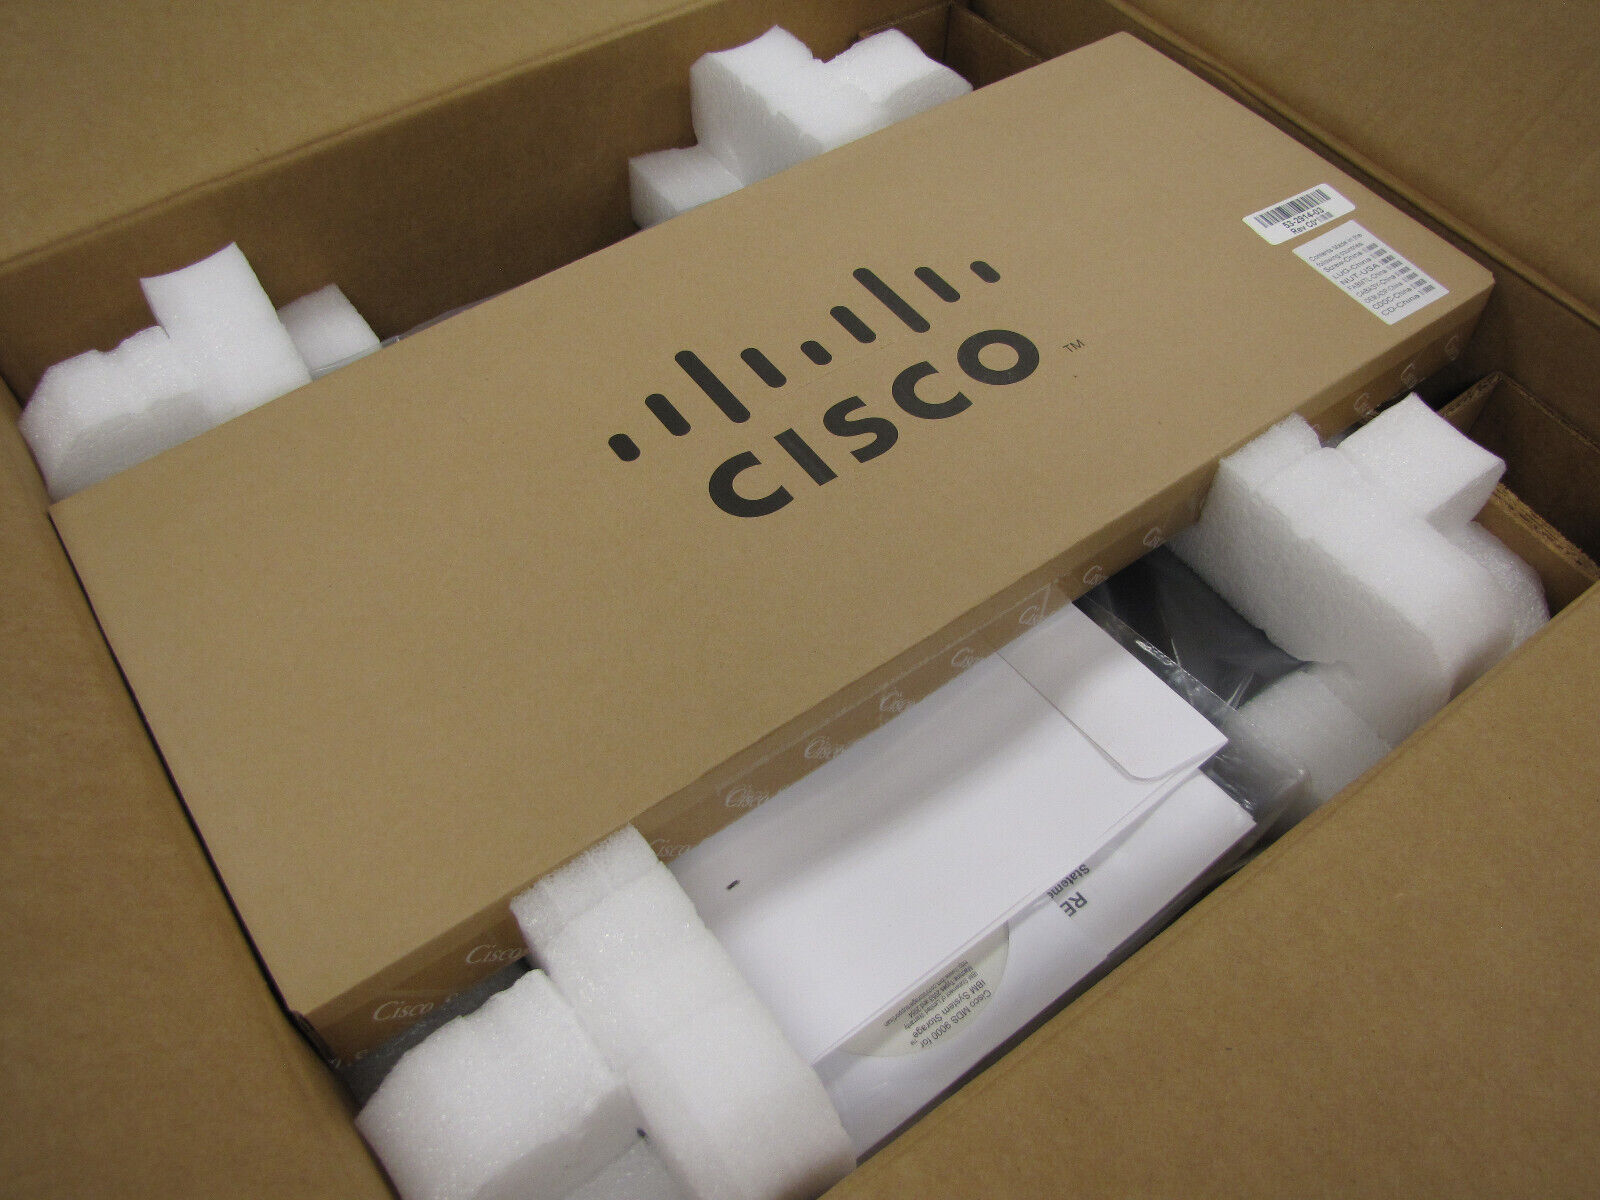 Cisco MDS 9124 24-Port Multilayer Fabric Switch DS-C9124-K9 V04 - NEW in box